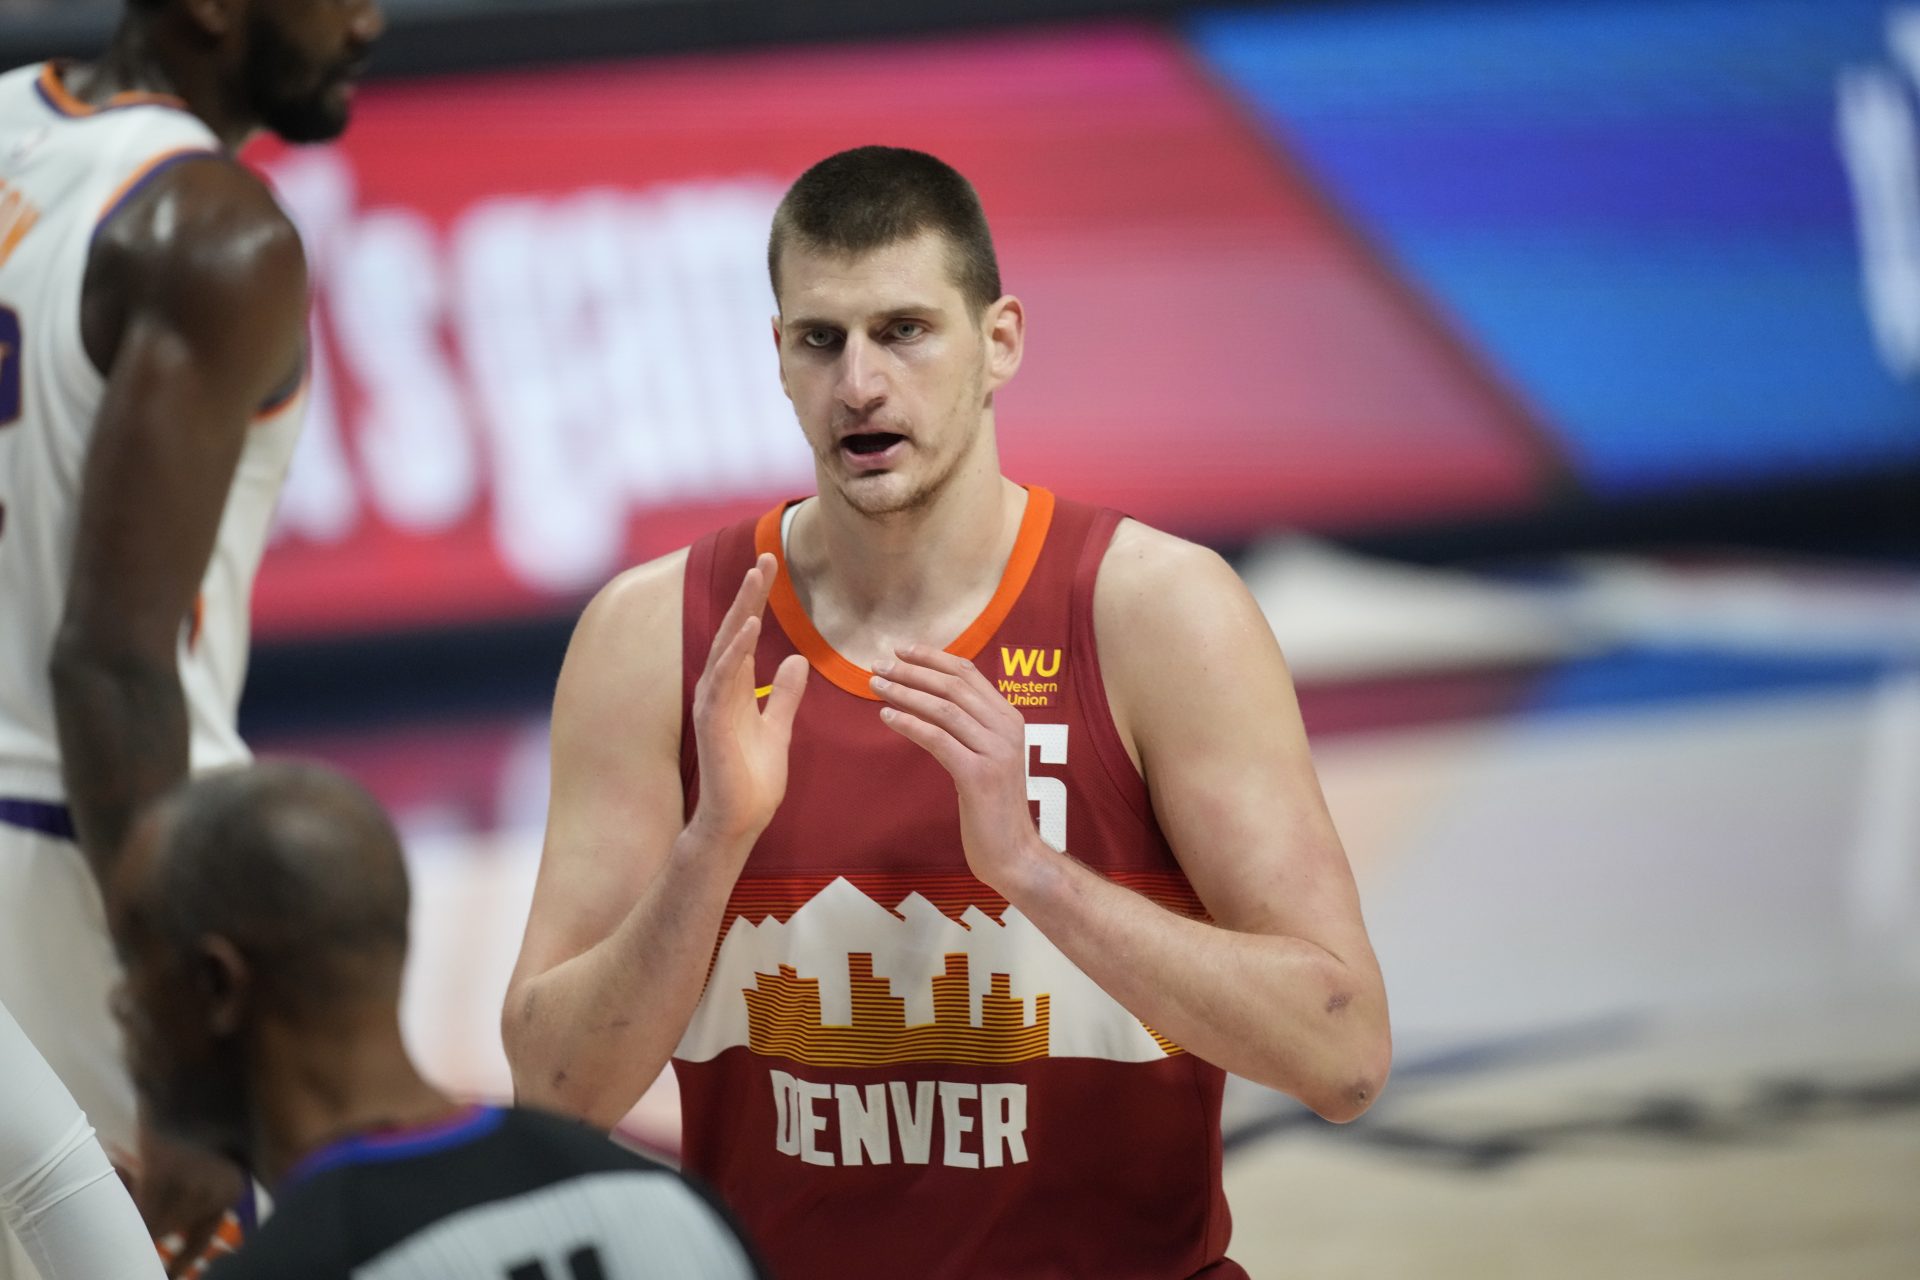 List: Nuggets Alive to About Nikola Jokic’s Relaxation Ahead of Tokyo Olympics Decision